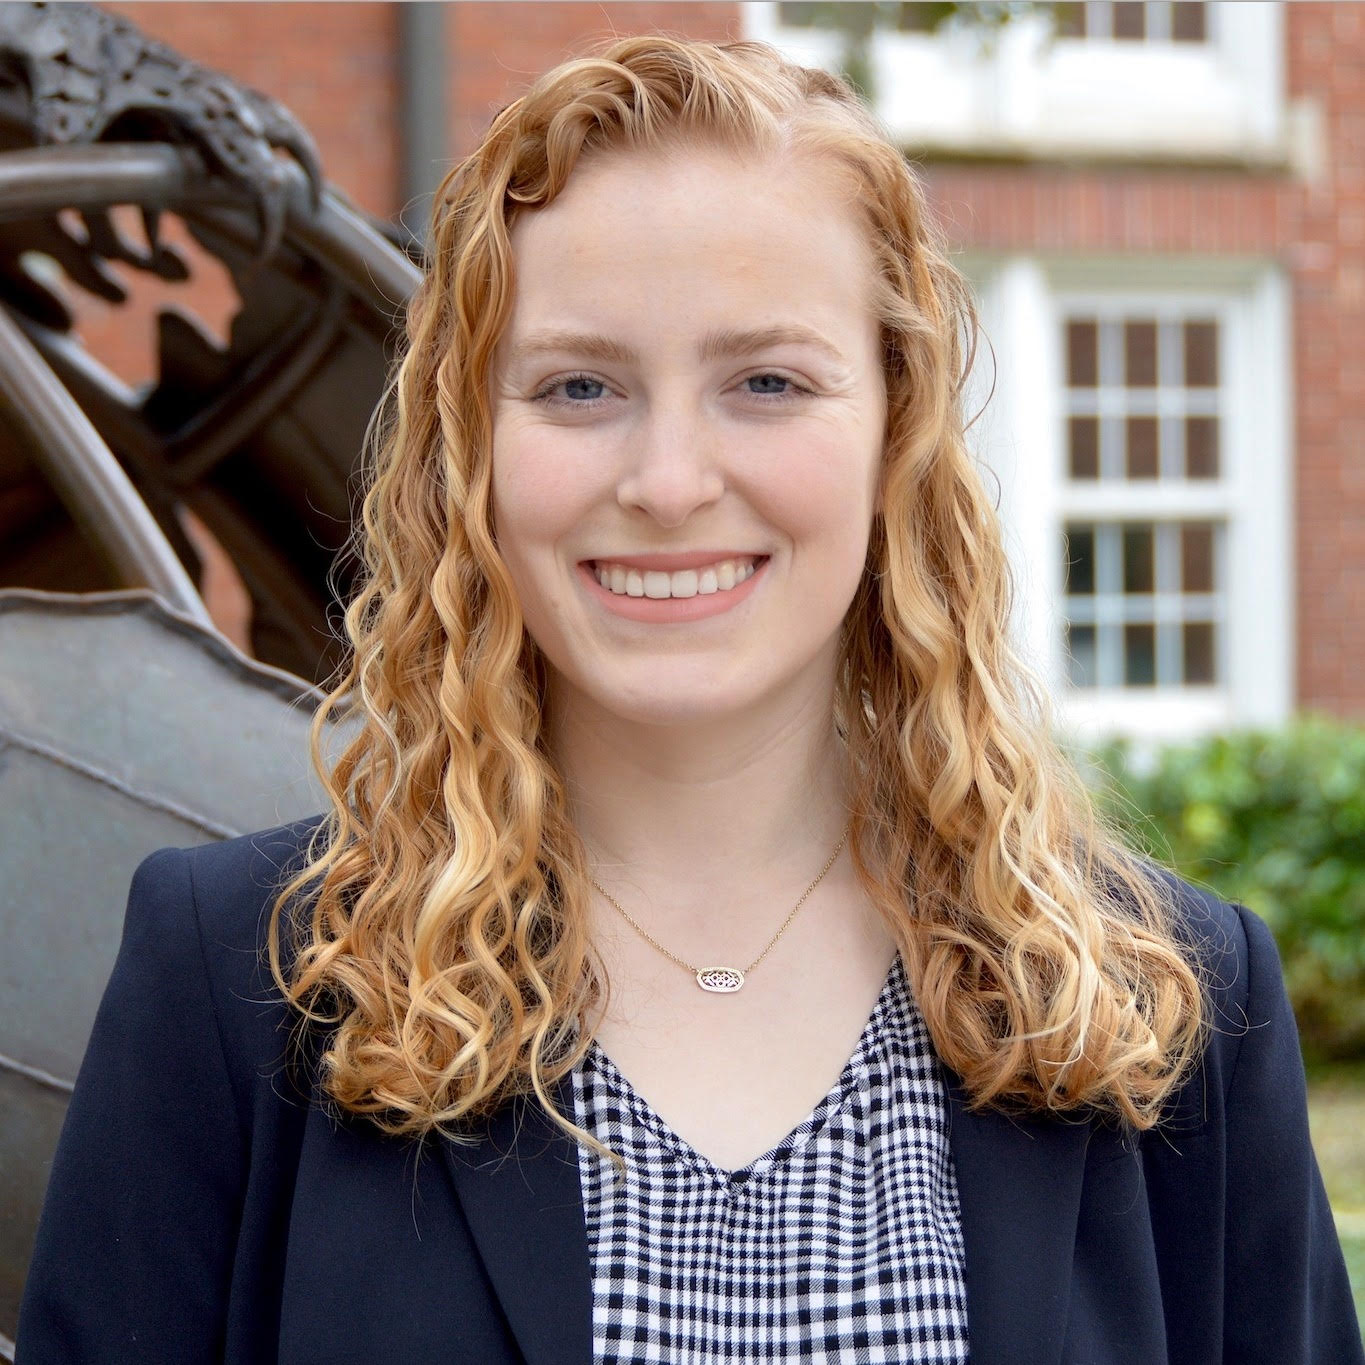 One Person Can Make a Difference - Meet Campus Chairperson, Paige